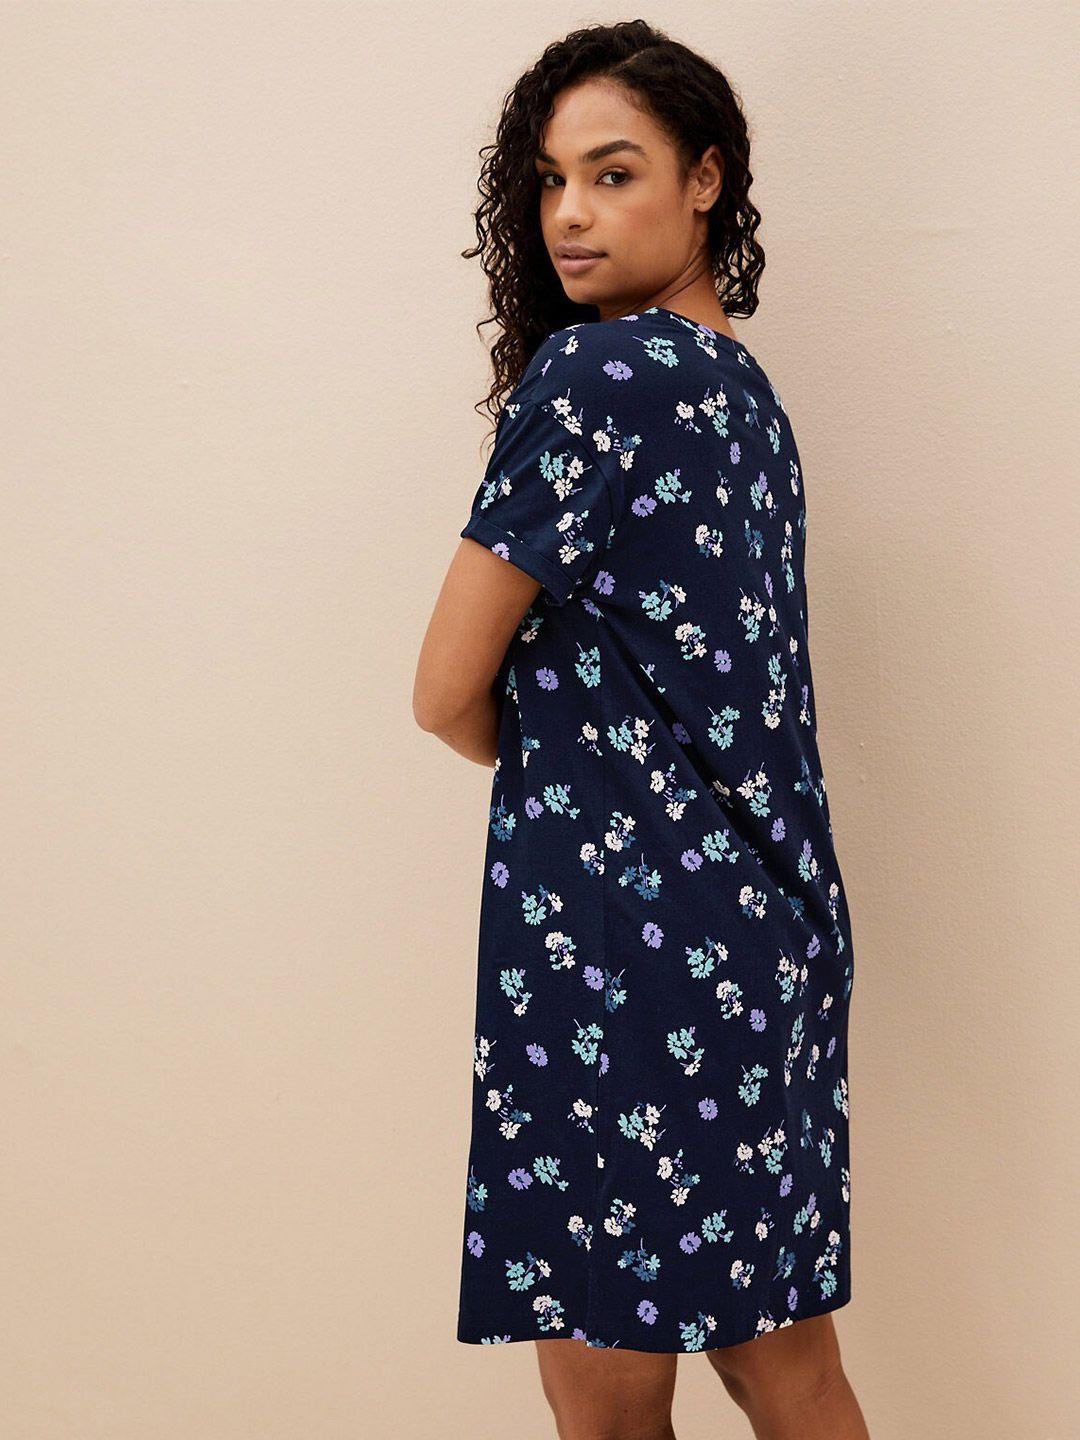 marks-&-spencer-floral-printed-pure-cotton-nightdress